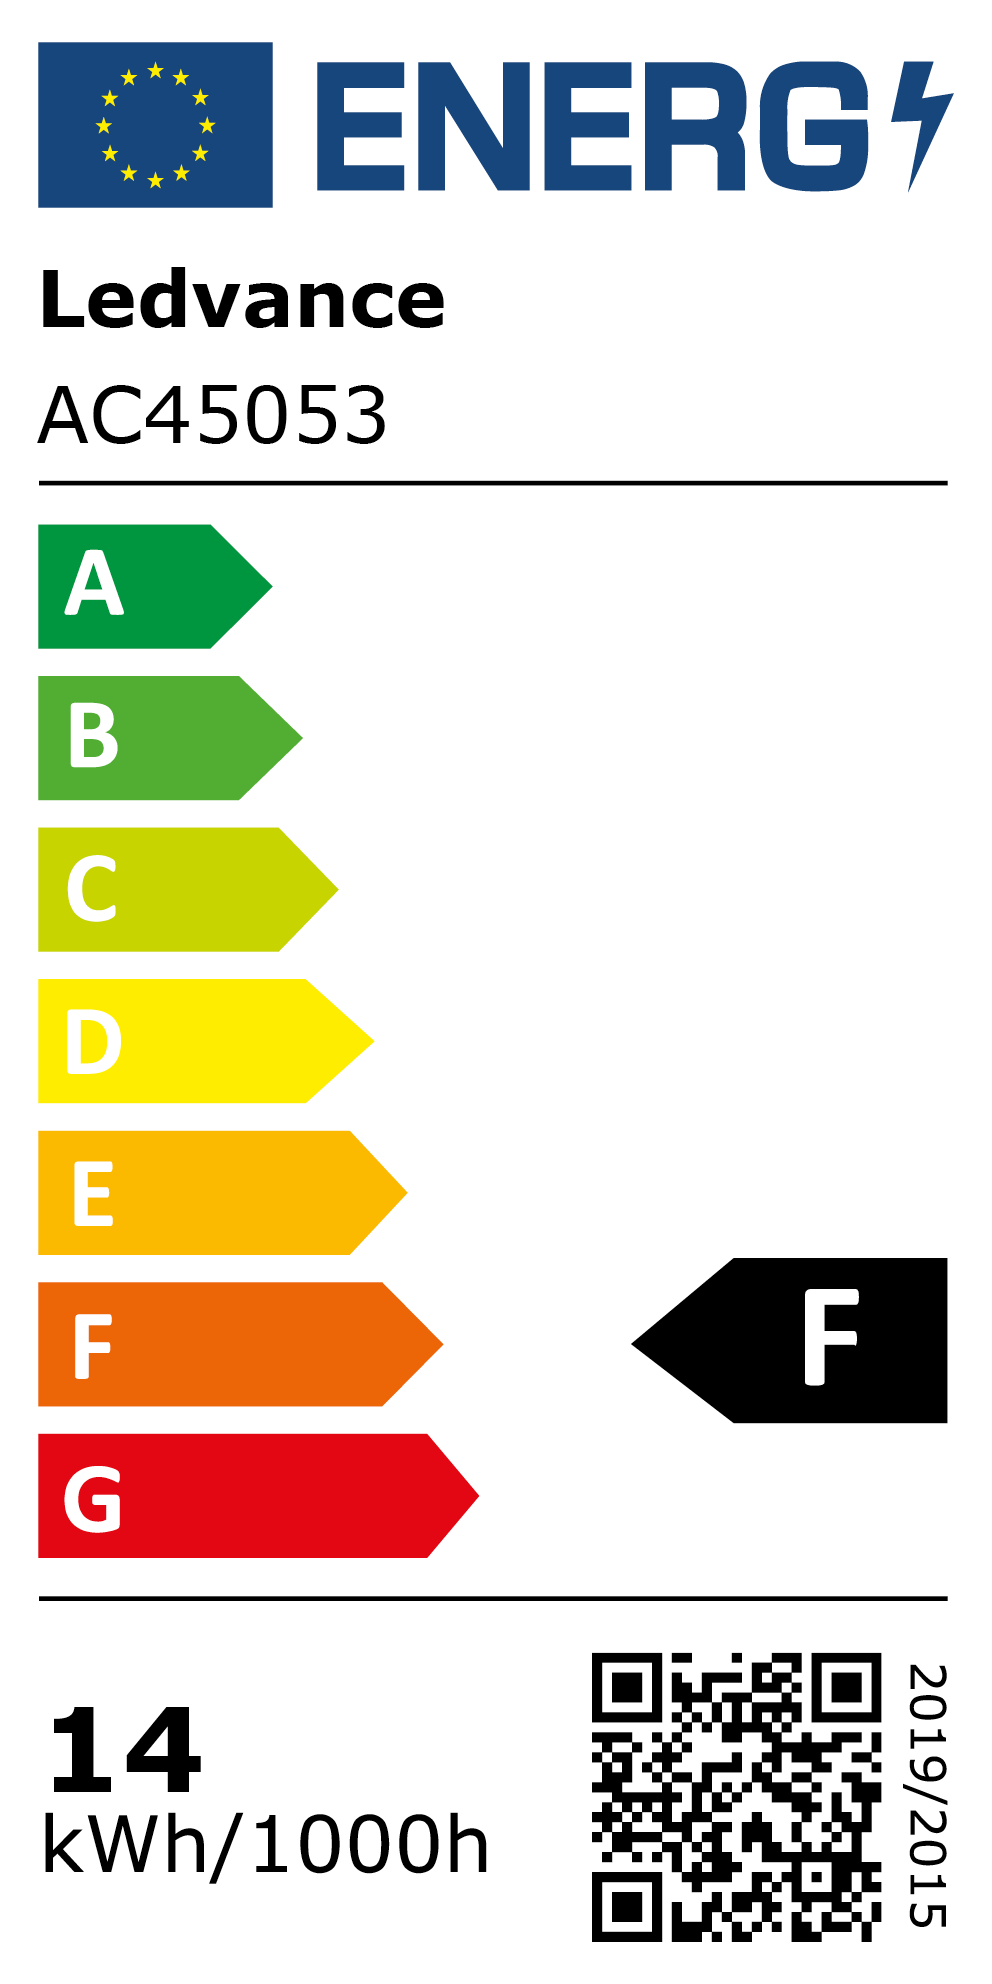 New 2021 Energy Rating Label: MPN AC45053